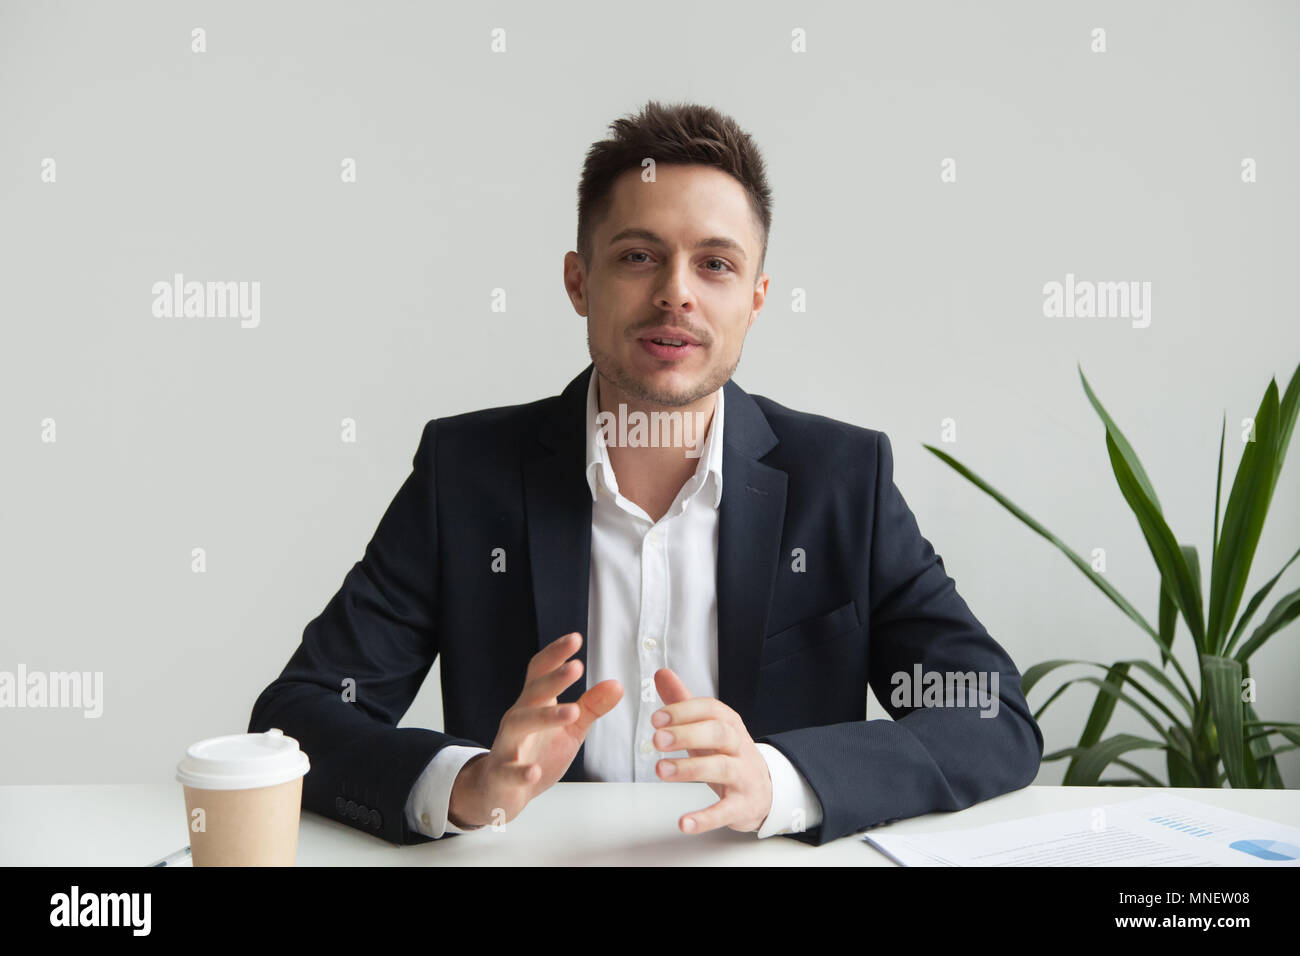 Confident CEO talking about company success strategy Stock Photo